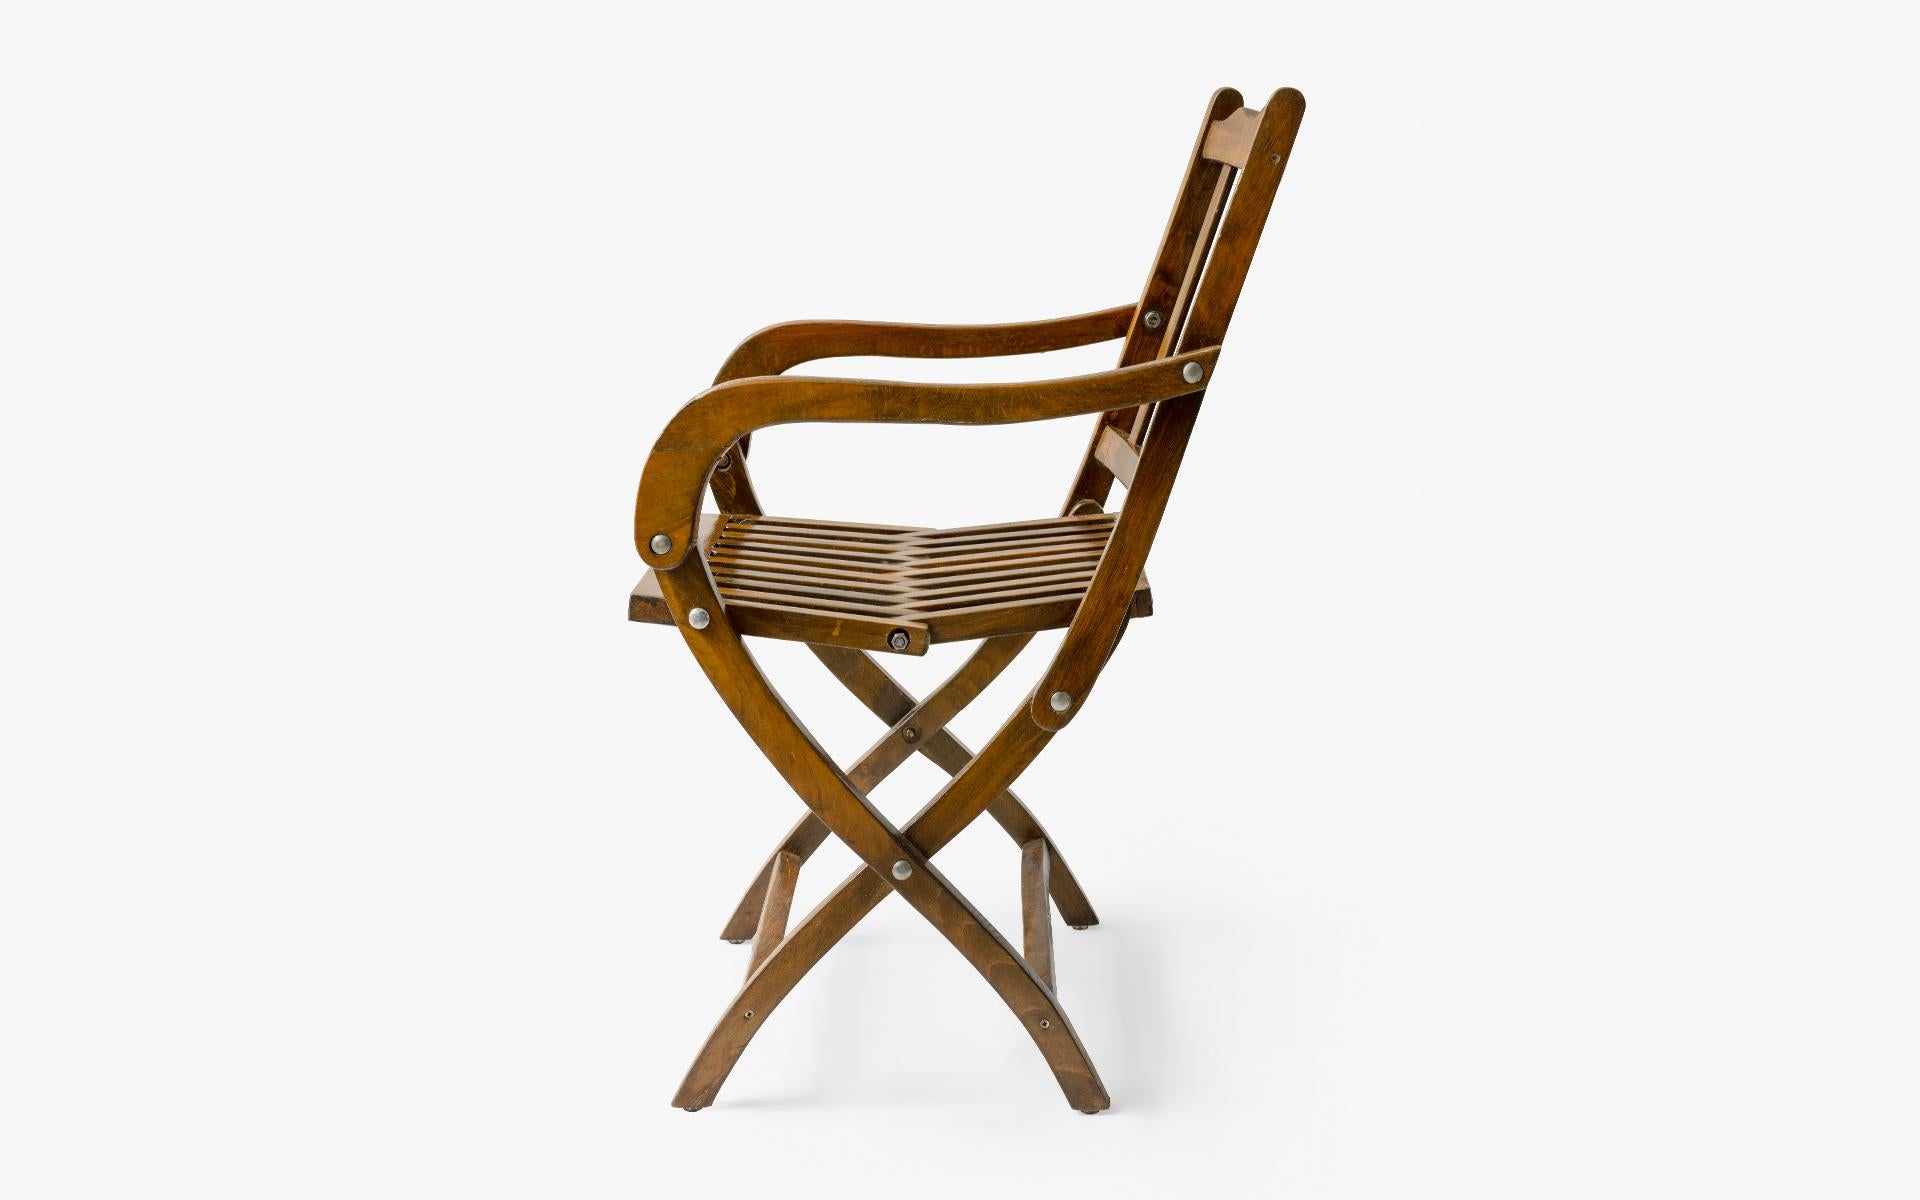 This folding wooden garden chair, found in the 